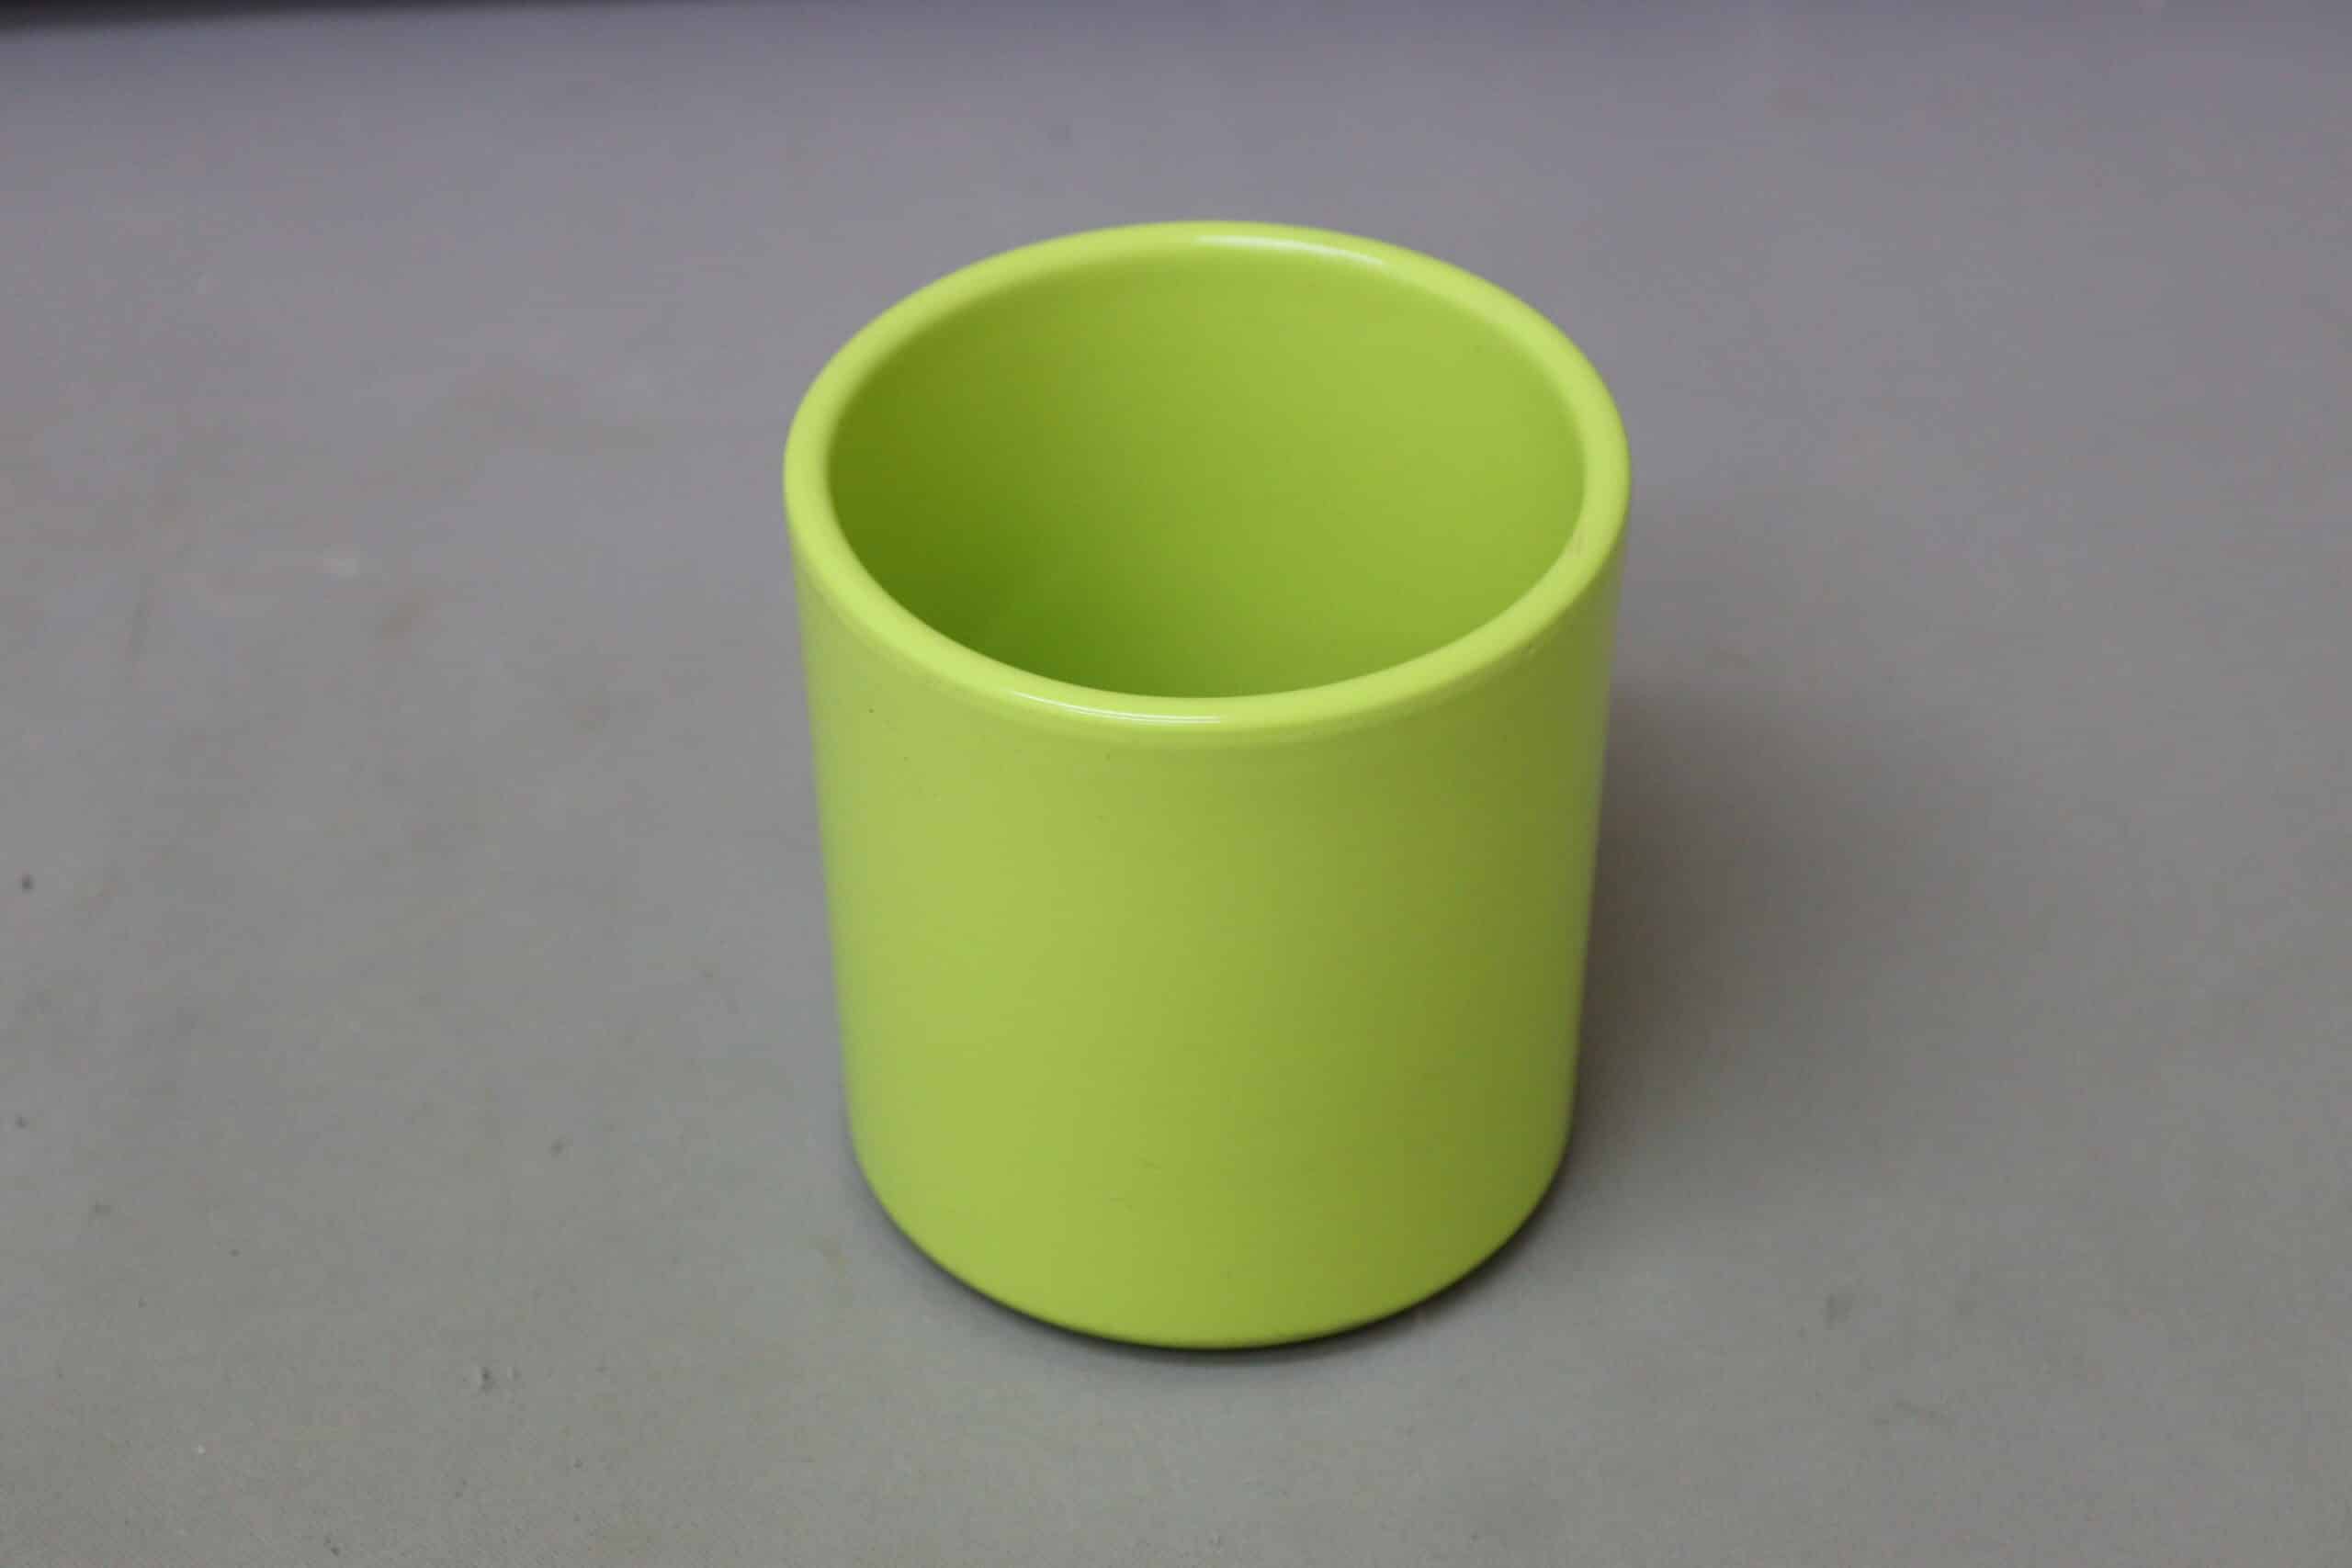 Smooth pastel green pot cover for potted plants.